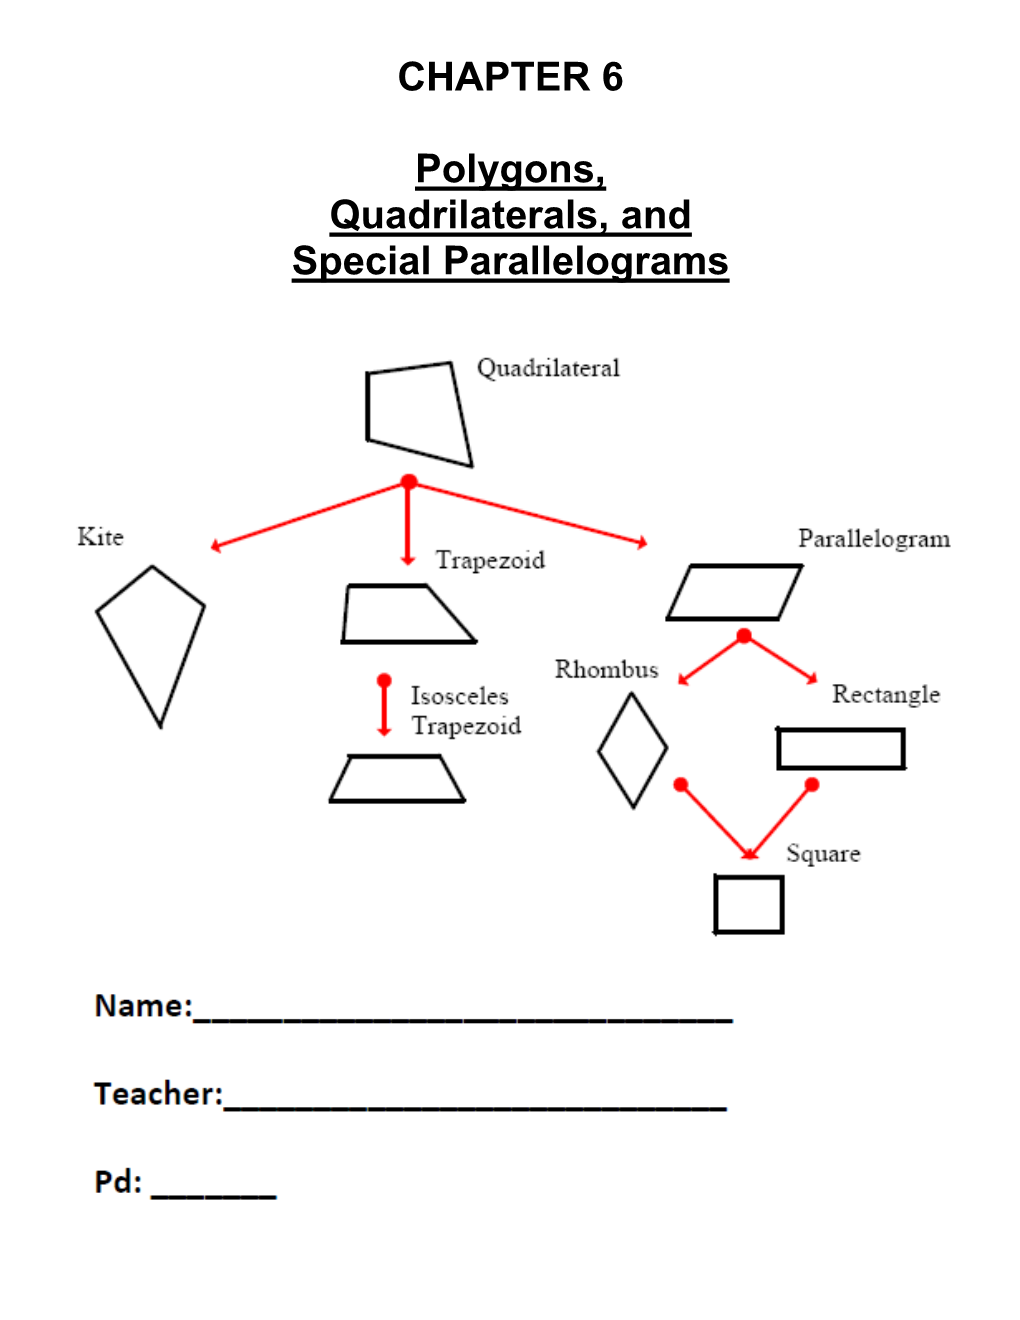 CHAPTER 6 Polygons, Quadrilaterals, and Special Parallelograms